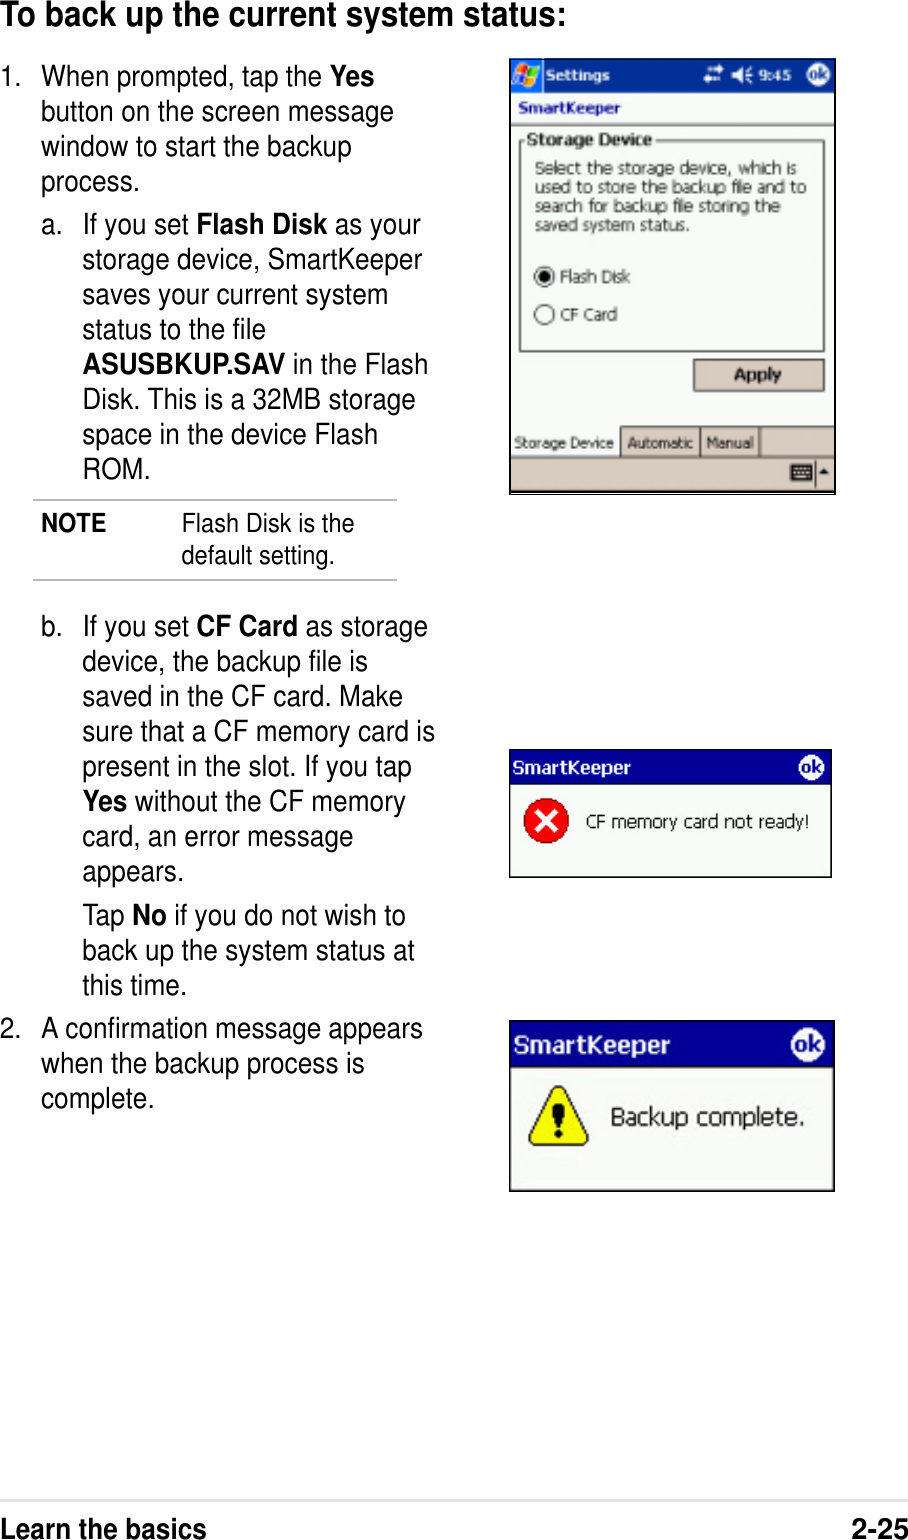 Learn the basics2-251. When prompted, tap the Yesbutton on the screen messagewindow to start the backupprocess.a. If you set Flash Disk as yourstorage device, SmartKeepersaves your current systemstatus to the fileASUSBKUP.SAV in the FlashDisk. This is a 32MB storagespace in the device FlashROM.NOTE Flash Disk is thedefault setting.b. If you set CF Card as storagedevice, the backup file issaved in the CF card. Makesure that a CF memory card ispresent in the slot. If you tapYes without the CF memorycard, an error messageappears.Tap No if you do not wish toback up the system status atthis time.2. A confirmation message appearswhen the backup process iscomplete.To back up the current system status: